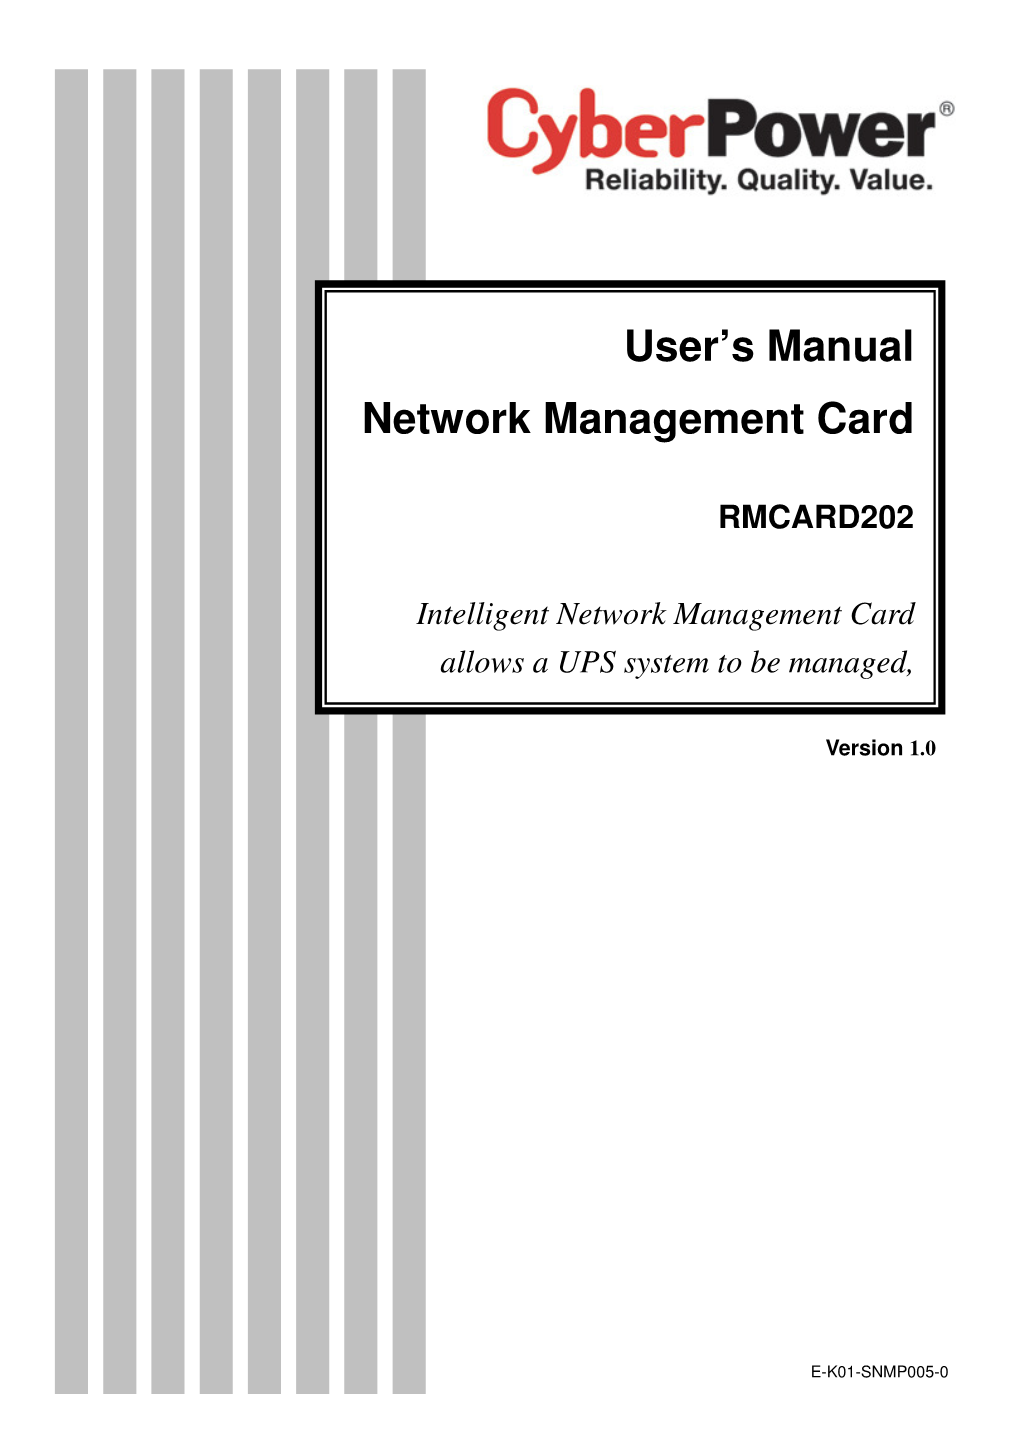 User's Manual Network Management Card